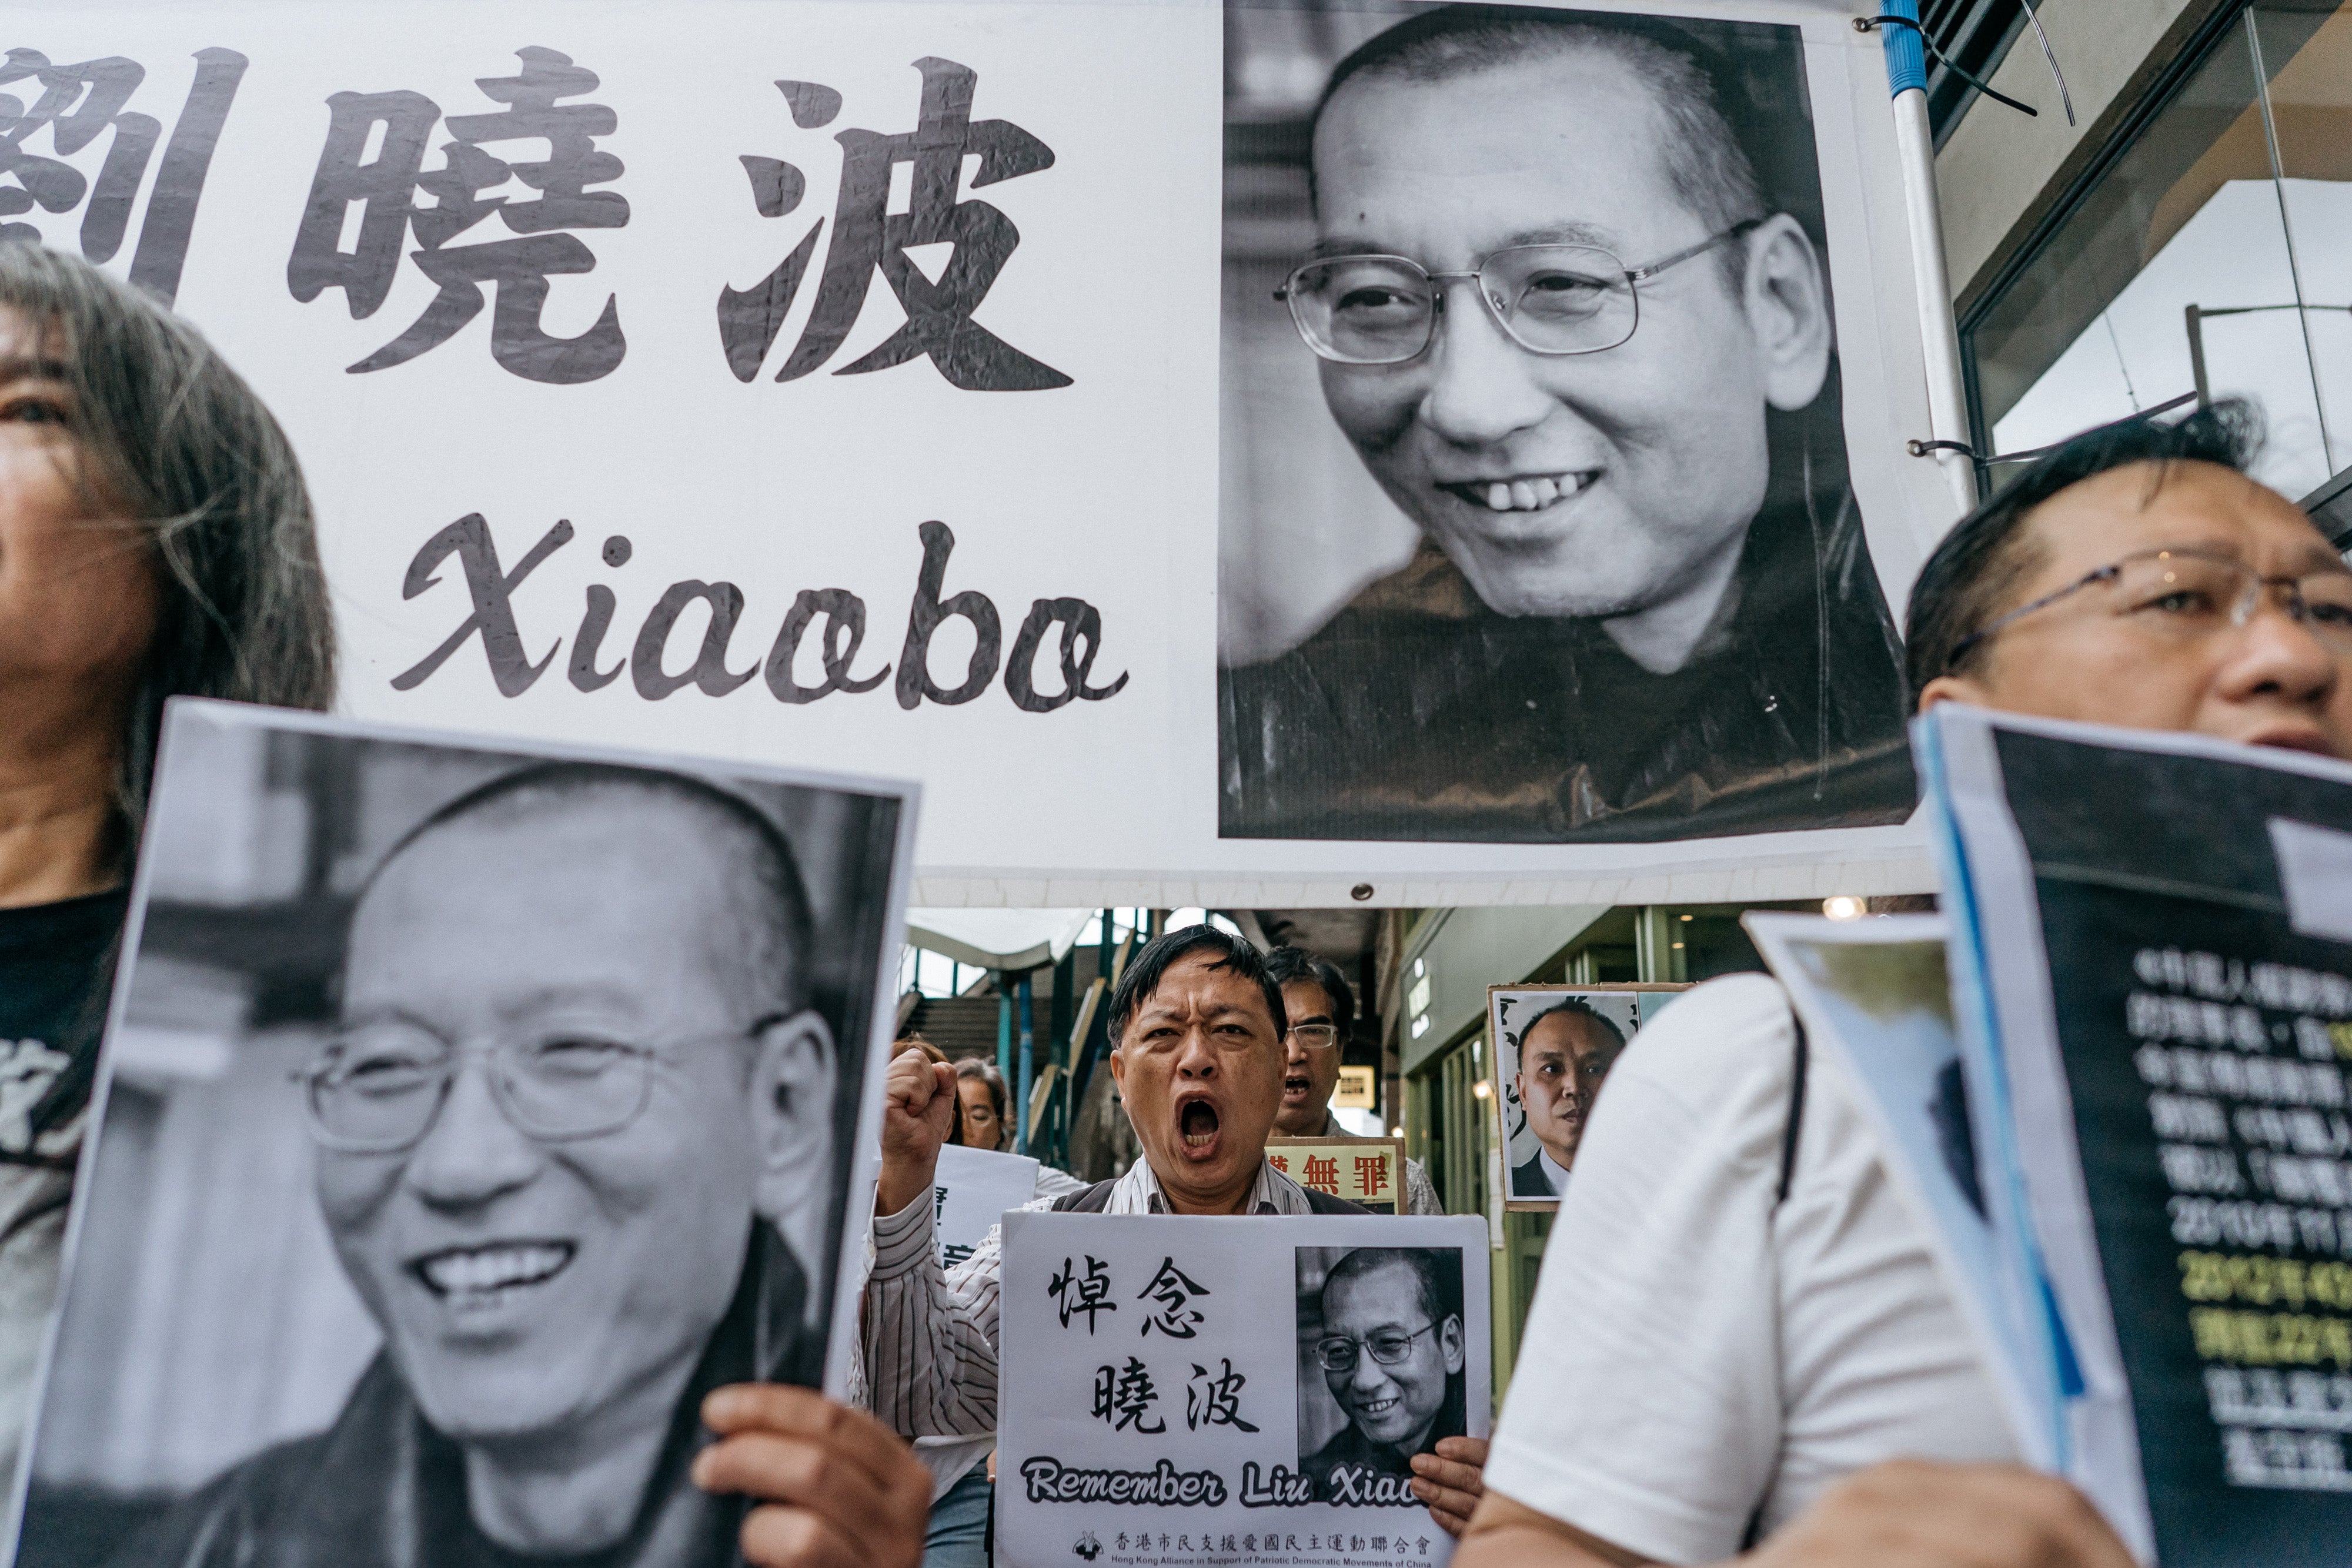 Beijing was offended by the west when Liu Xiaobo was awarded the Nobel Peace Prize